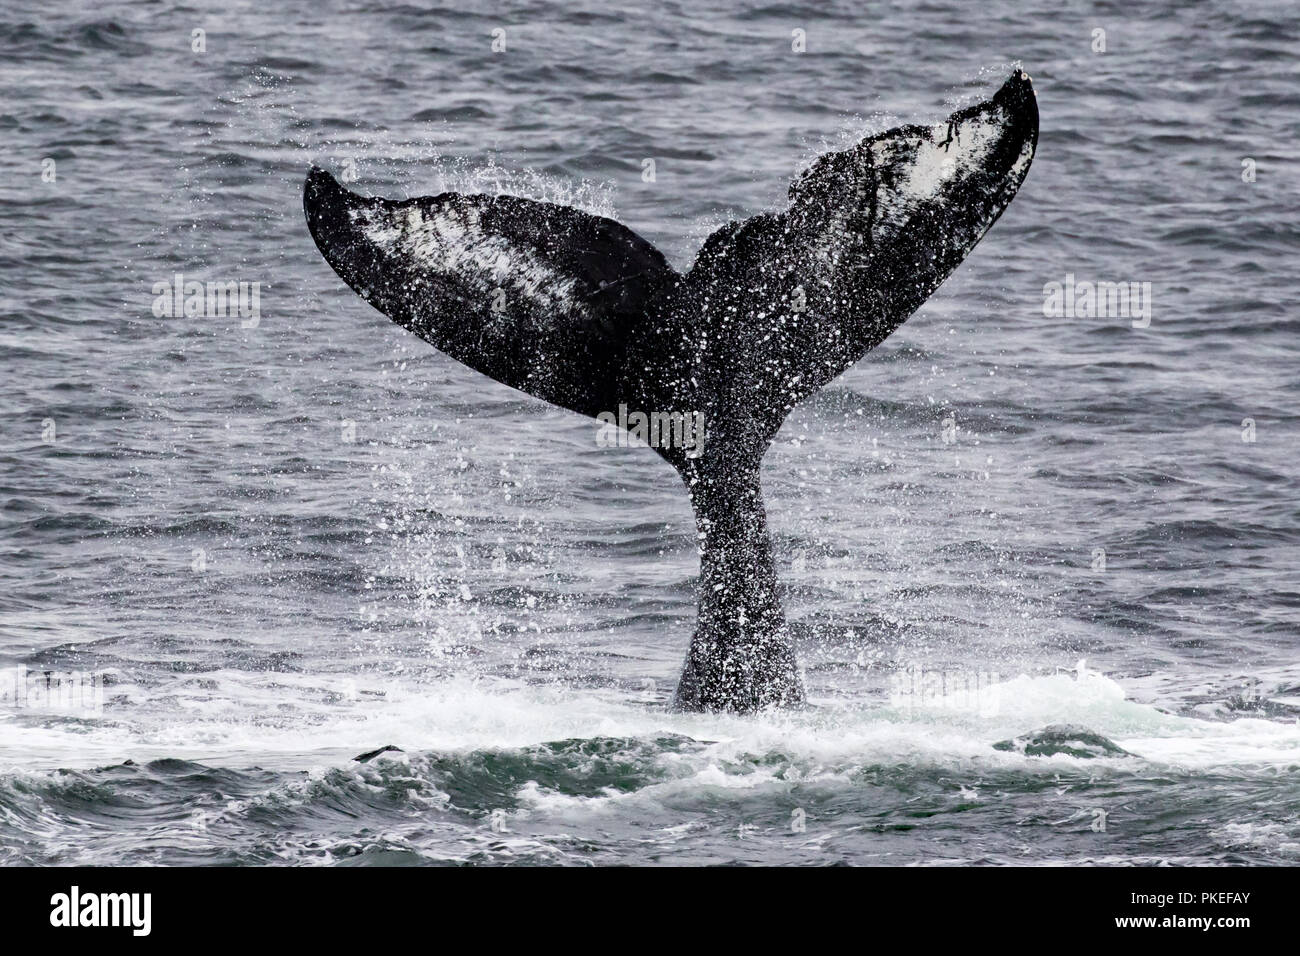 Humpback whale named Carina lifts its tail high into the air during a session of cooperative bubble net feeding in Chatham strait in southeast Alaska Stock Photo